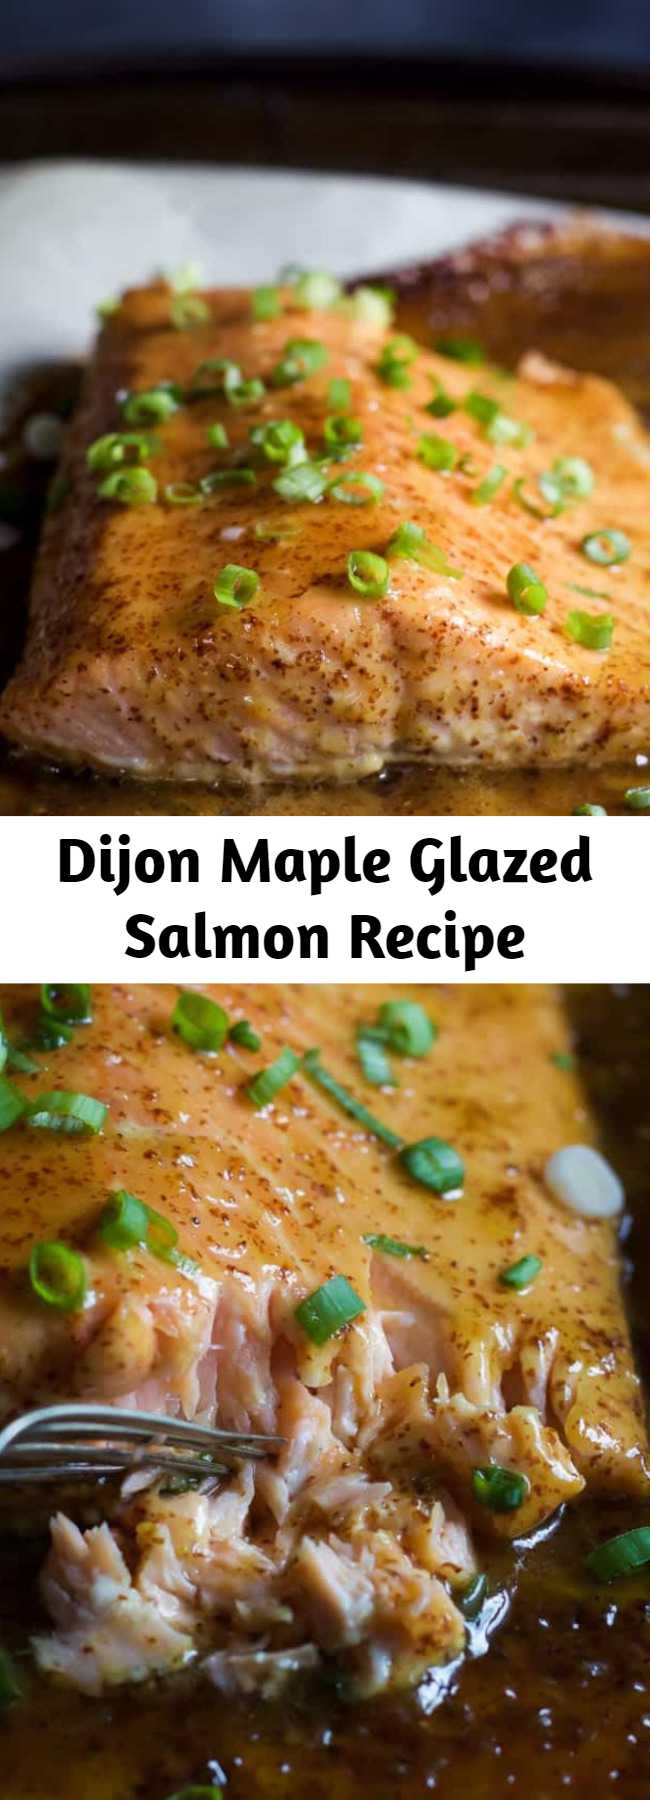 Dijon Maple Glazed Salmon Recipe - Dijon Maple Glazed Salmon is one of my favorite quick & healthy dinner recipes. It’s full of tangy and sweet flavors from only 3 ingredients with a whooping 218 calories per serving!